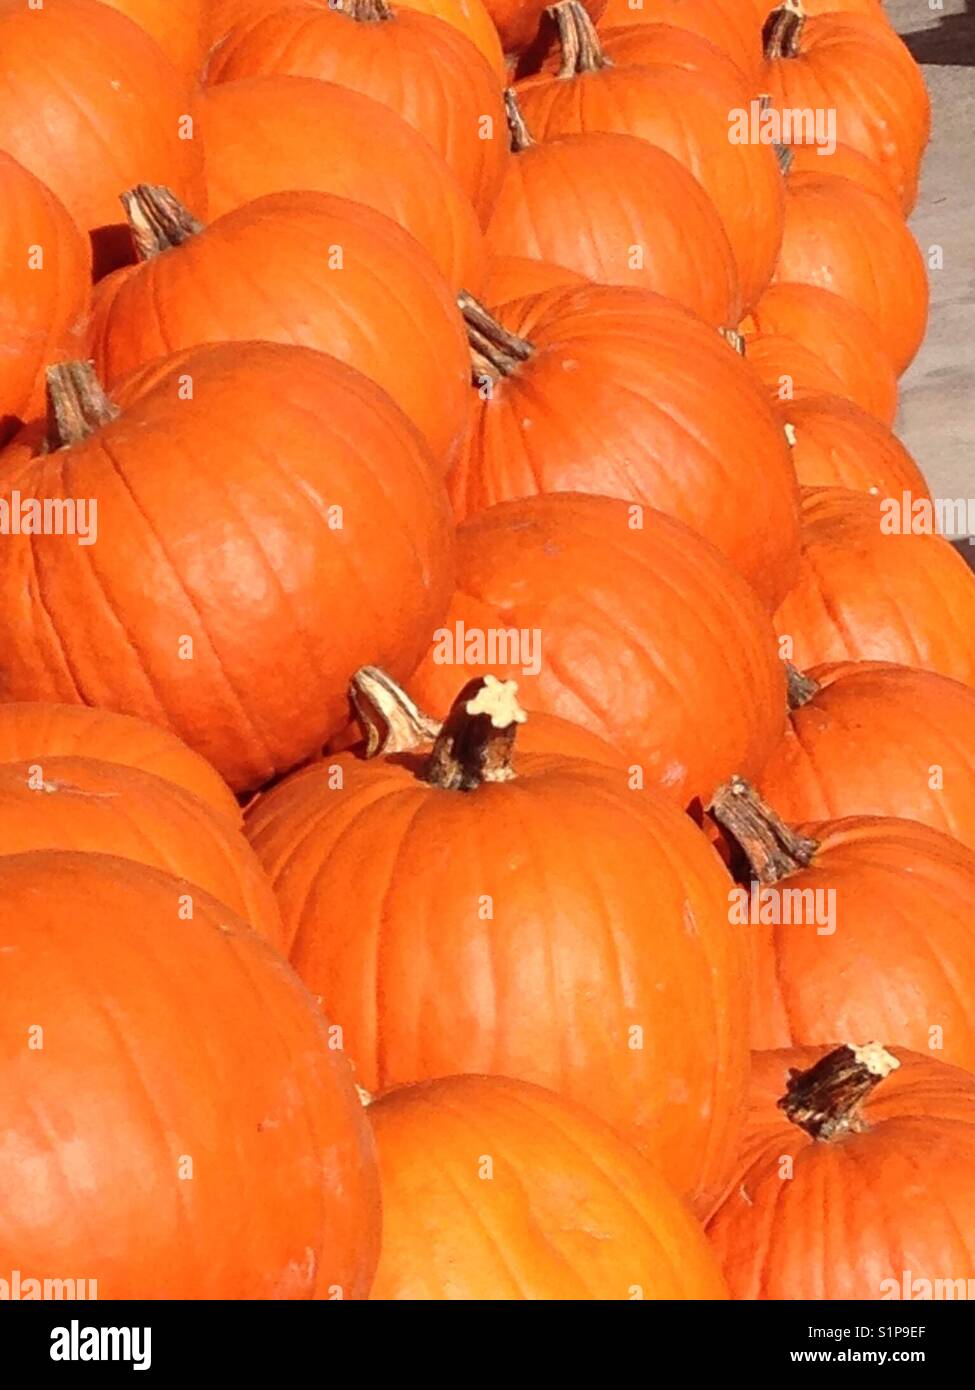 Rows and rows of plump pumpkins for sale Stock Photo